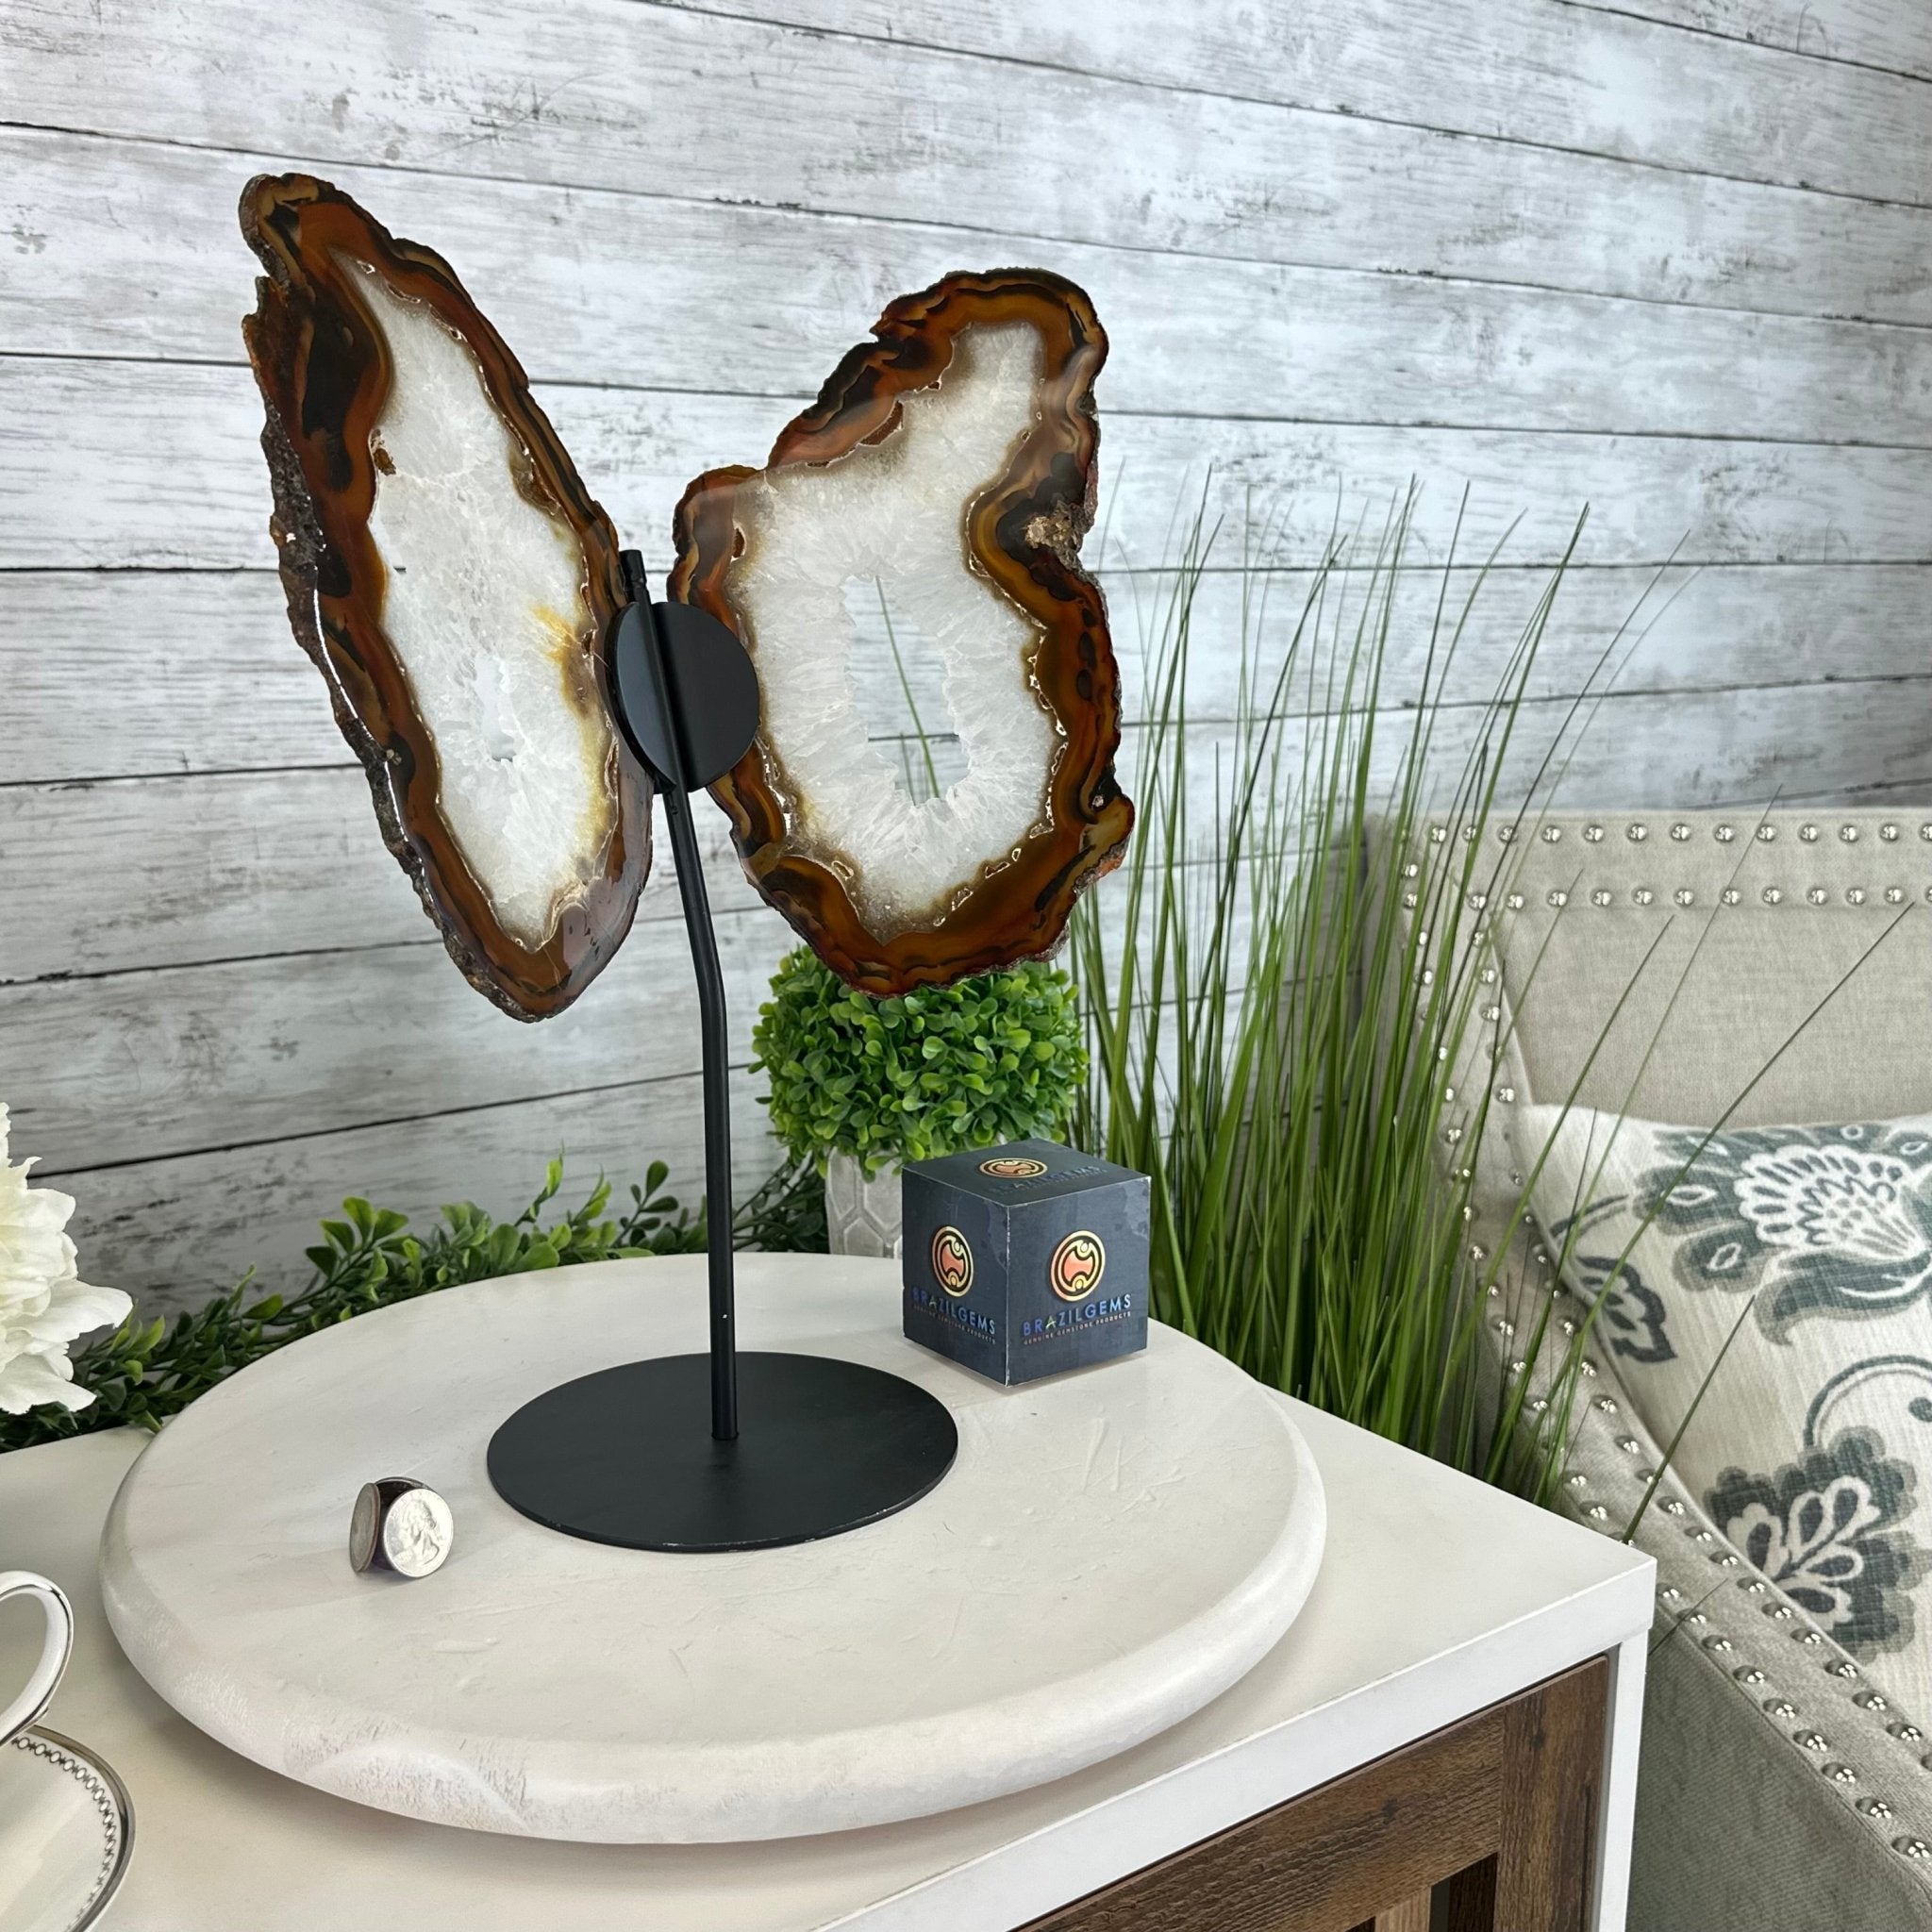 Natural Brazilian Agate "Butterfly Wings", 15" Tall #5050NA-083 - Brazil GemsBrazil GemsNatural Brazilian Agate "Butterfly Wings", 15" Tall #5050NA-083Agate Butterfly Wings5050NA-083